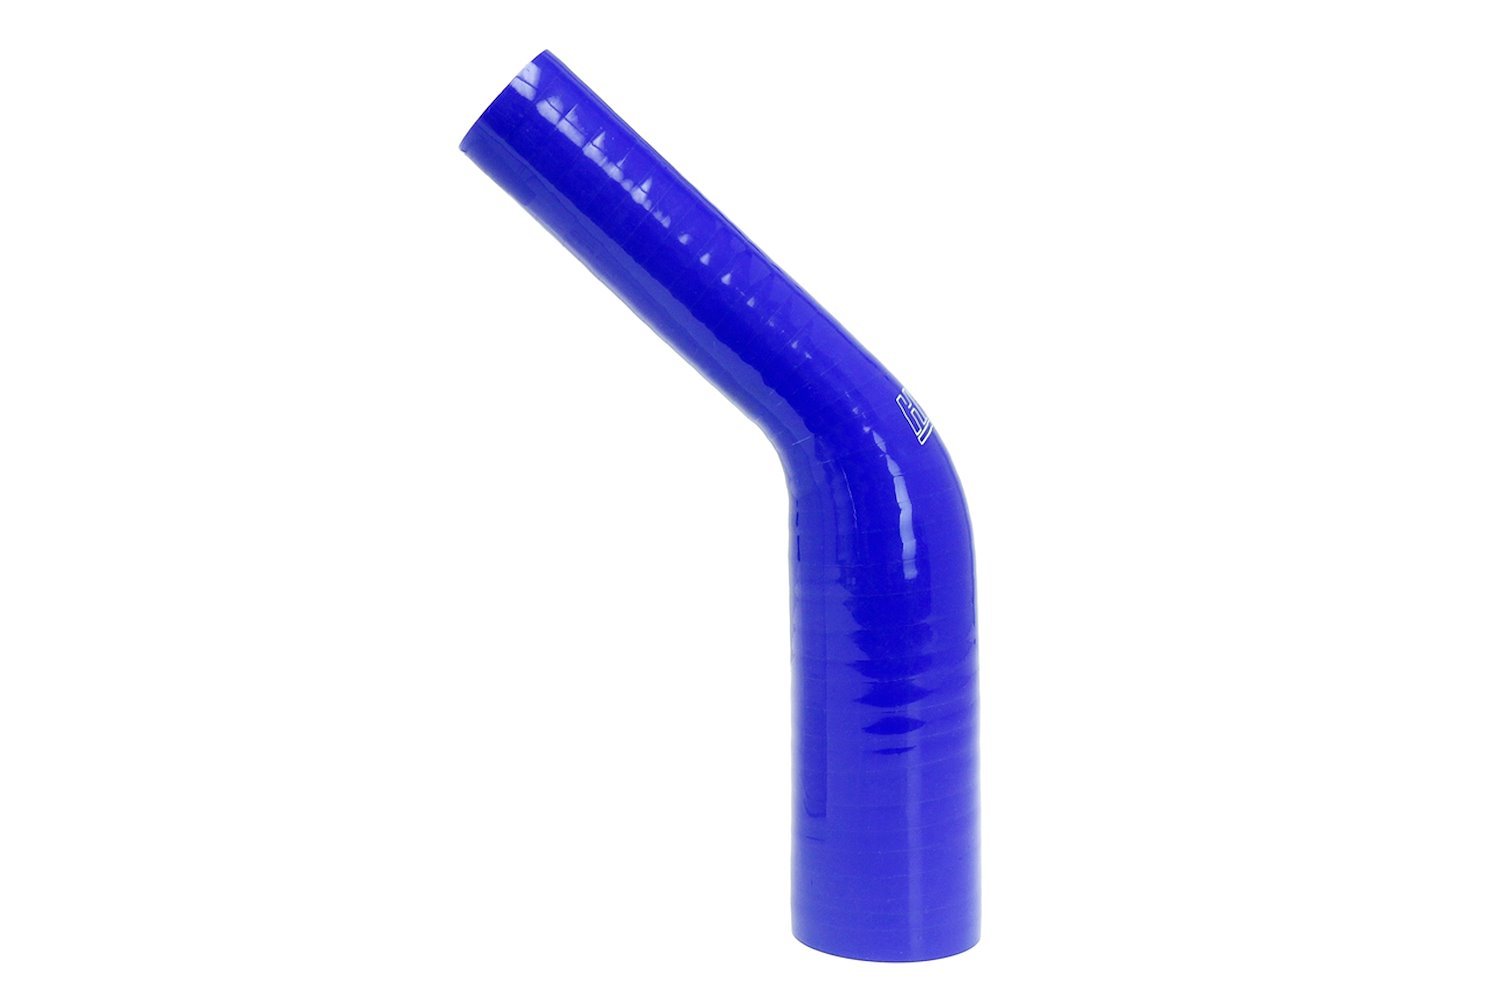 HTSER45-062-087-BLUE Silicone 45-Degree Elbow Hose, High-Temp 4-Ply Reinforced, 5/8 in. - 7/8 in. ID, Blue